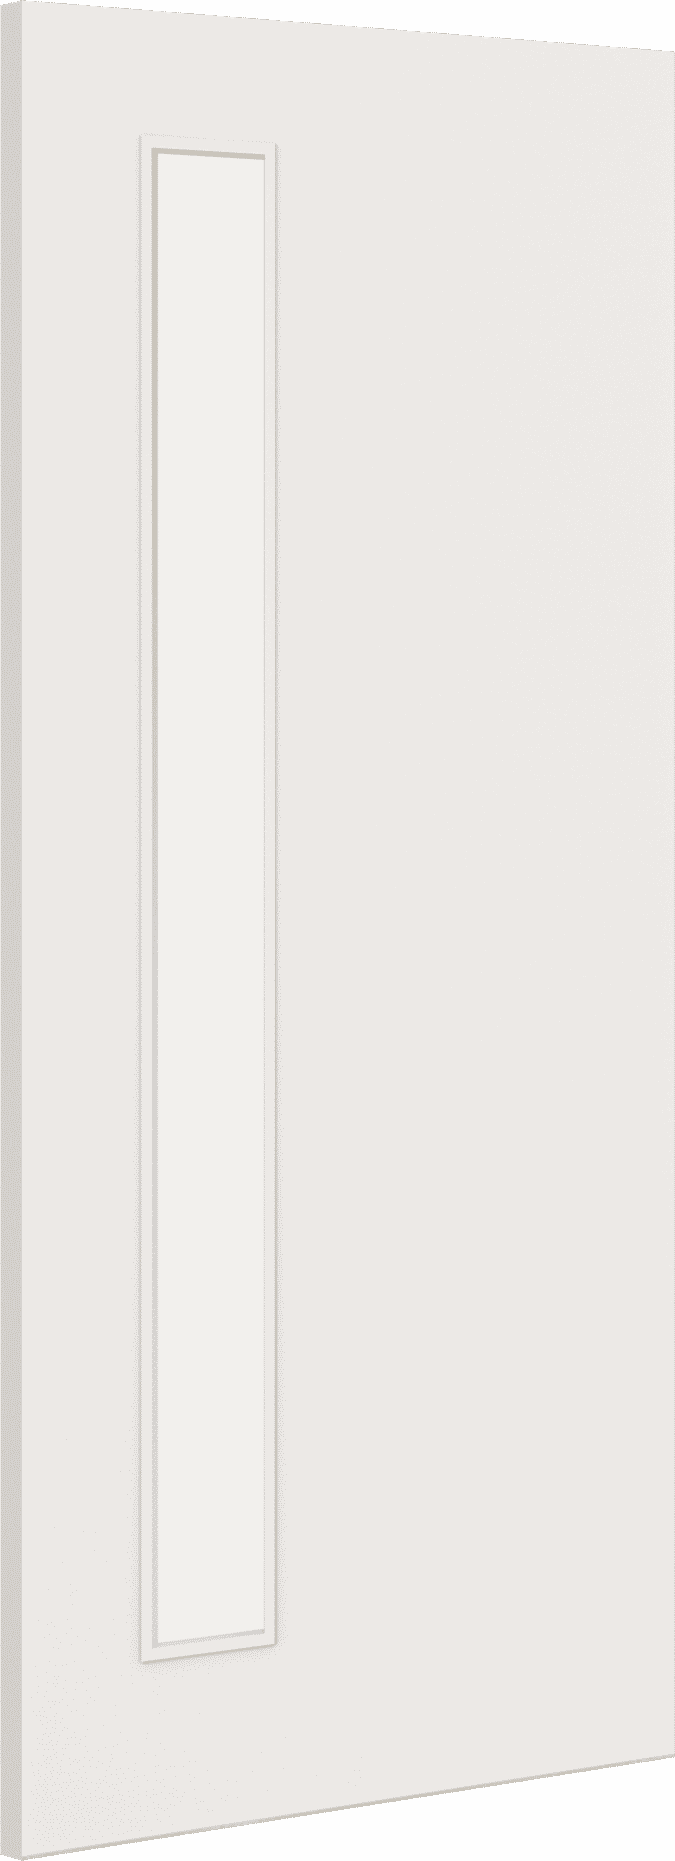 1981mm x 610mm x 44mm (24") Architectural Paint Grade White 06 Frosted Glazed Fire Door Blank